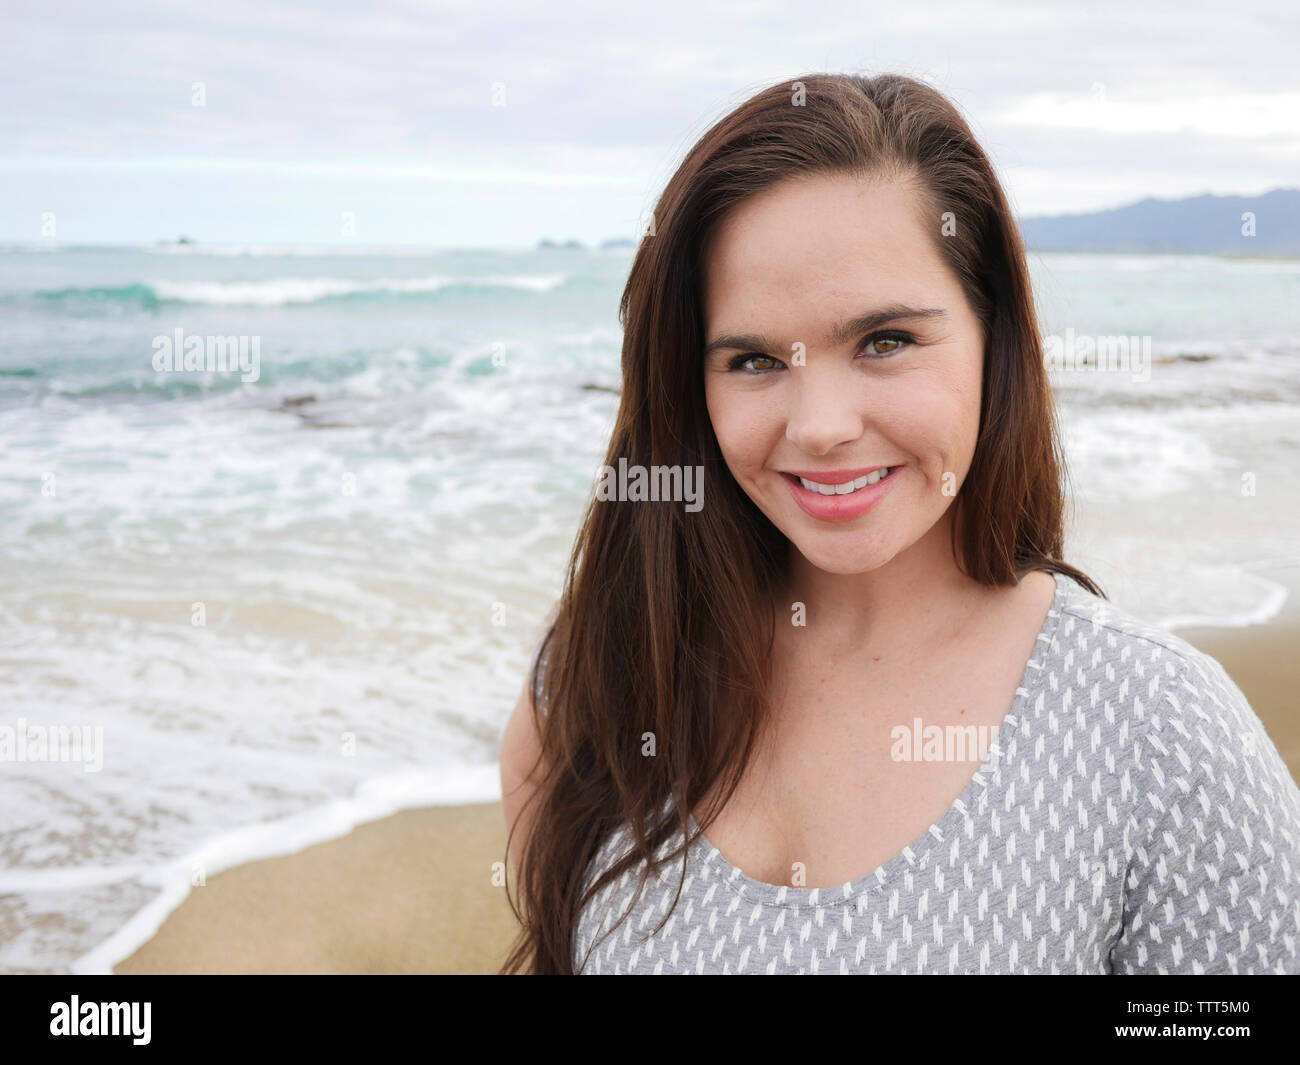 Portrait of happy woman standing at beach against cloudy sky Banque D'Images